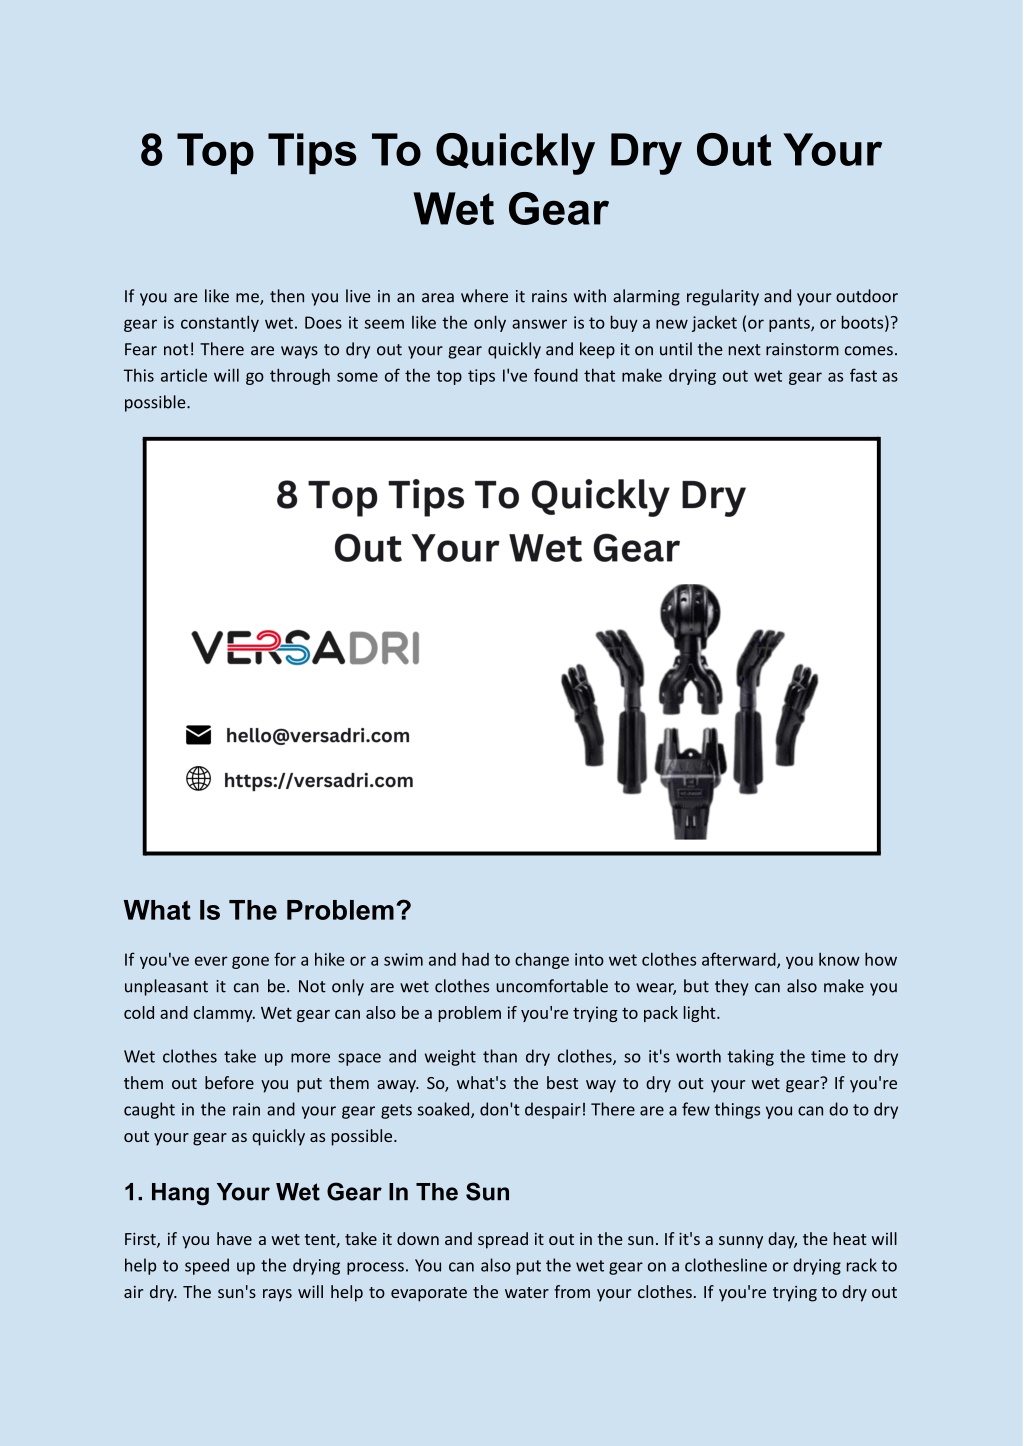 PPT - 8 Top Tips To Quickly Dry Out Your Wet Gear PowerPoint